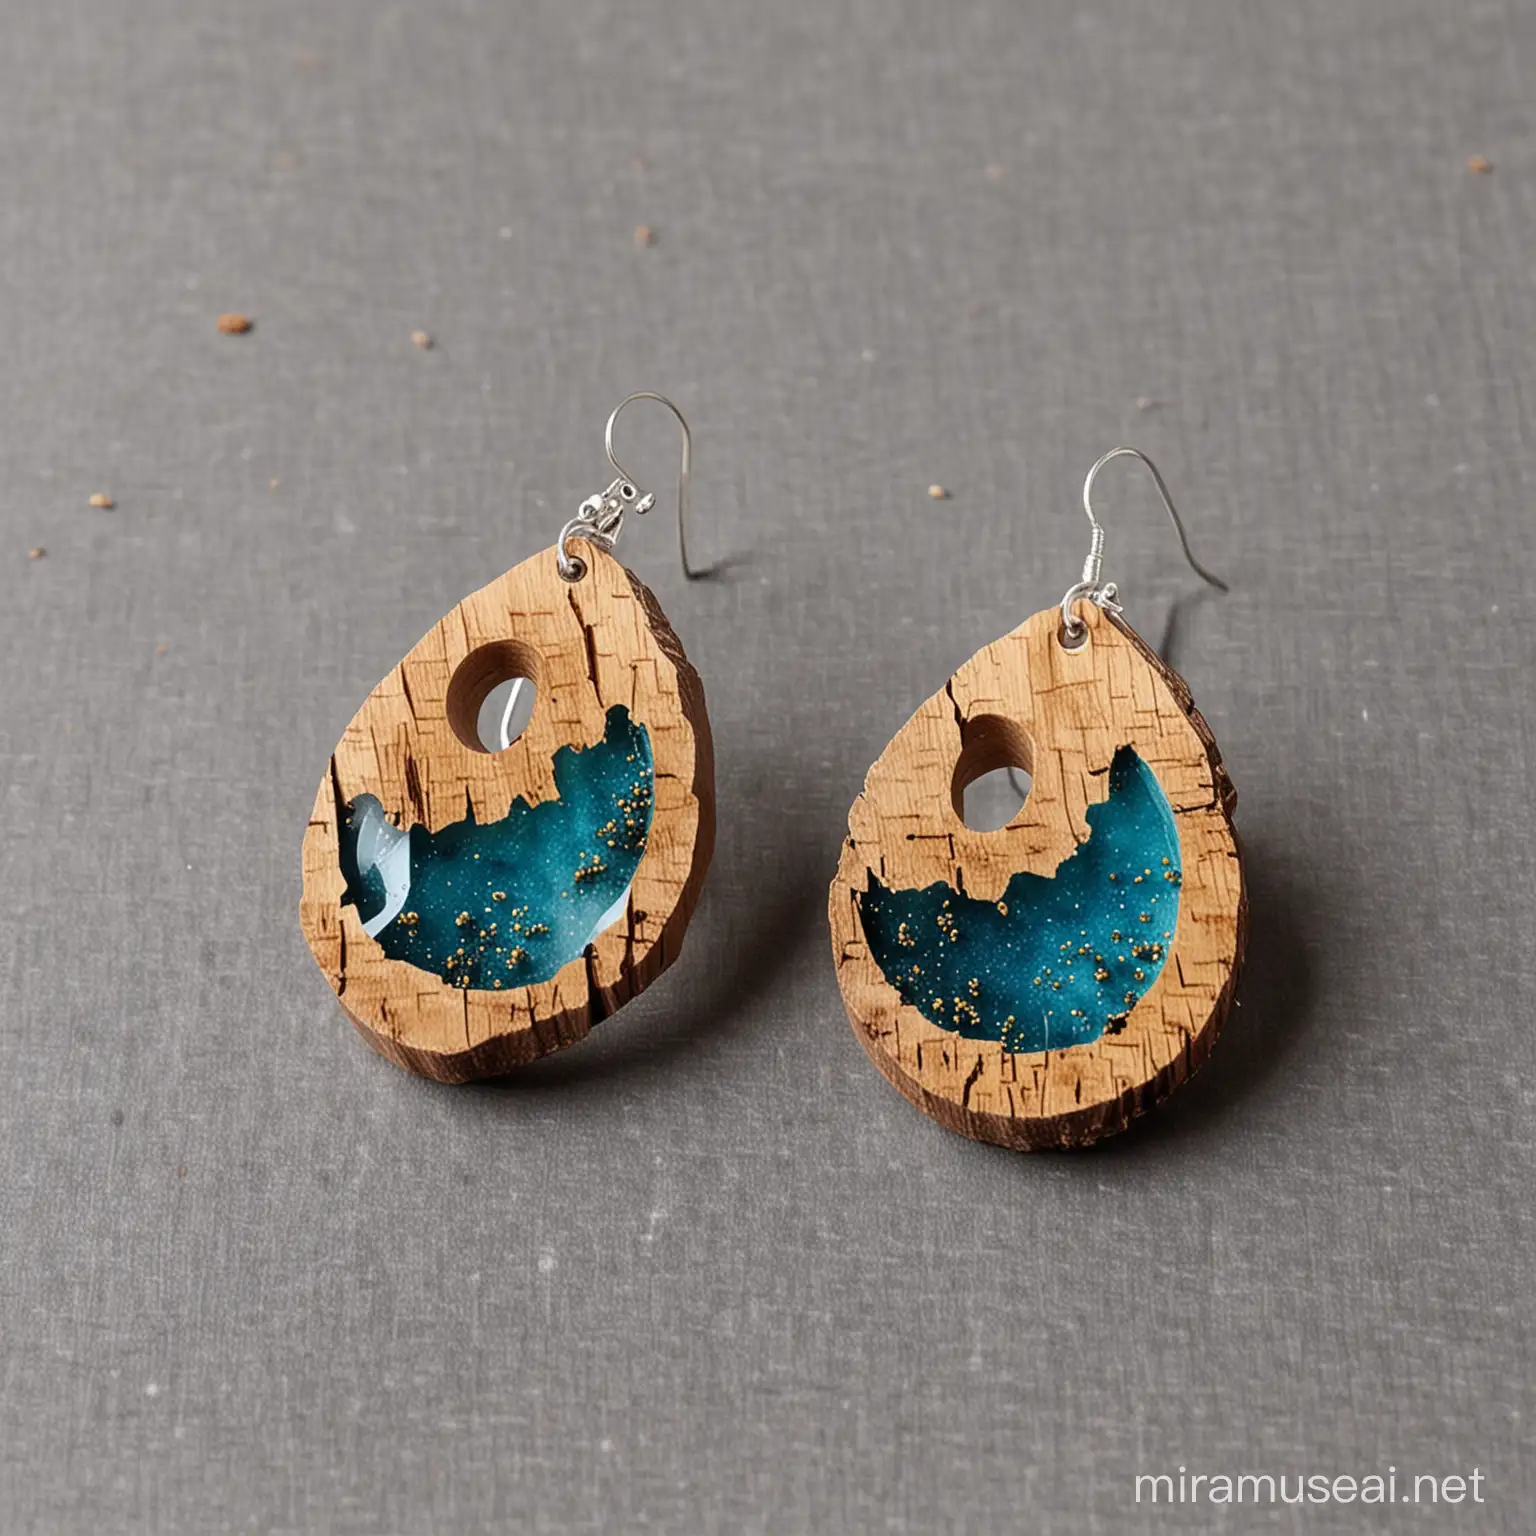 Handcrafted Resin Earrings with Natural Wood Accent